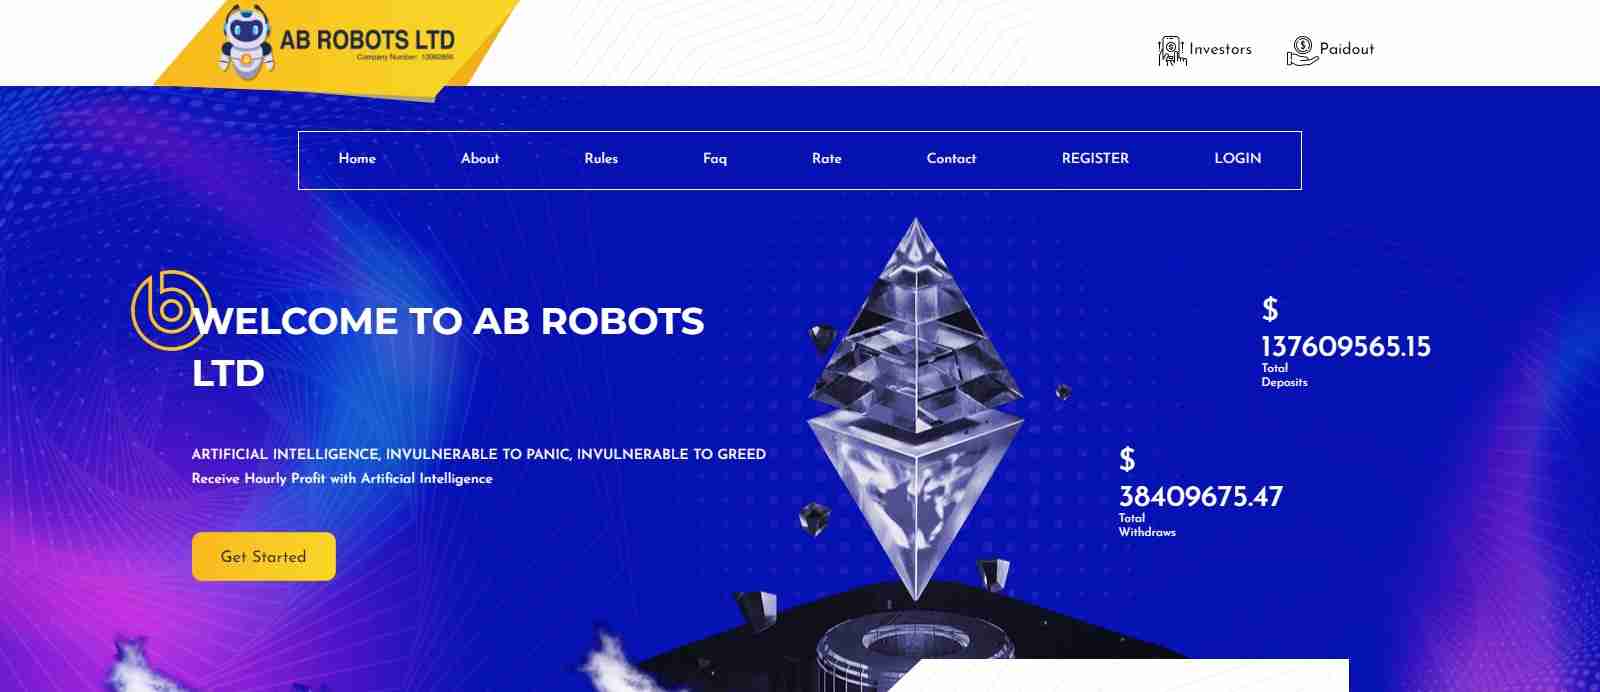 Robots Insure Investment Project Review : Paying Or Scam Project?